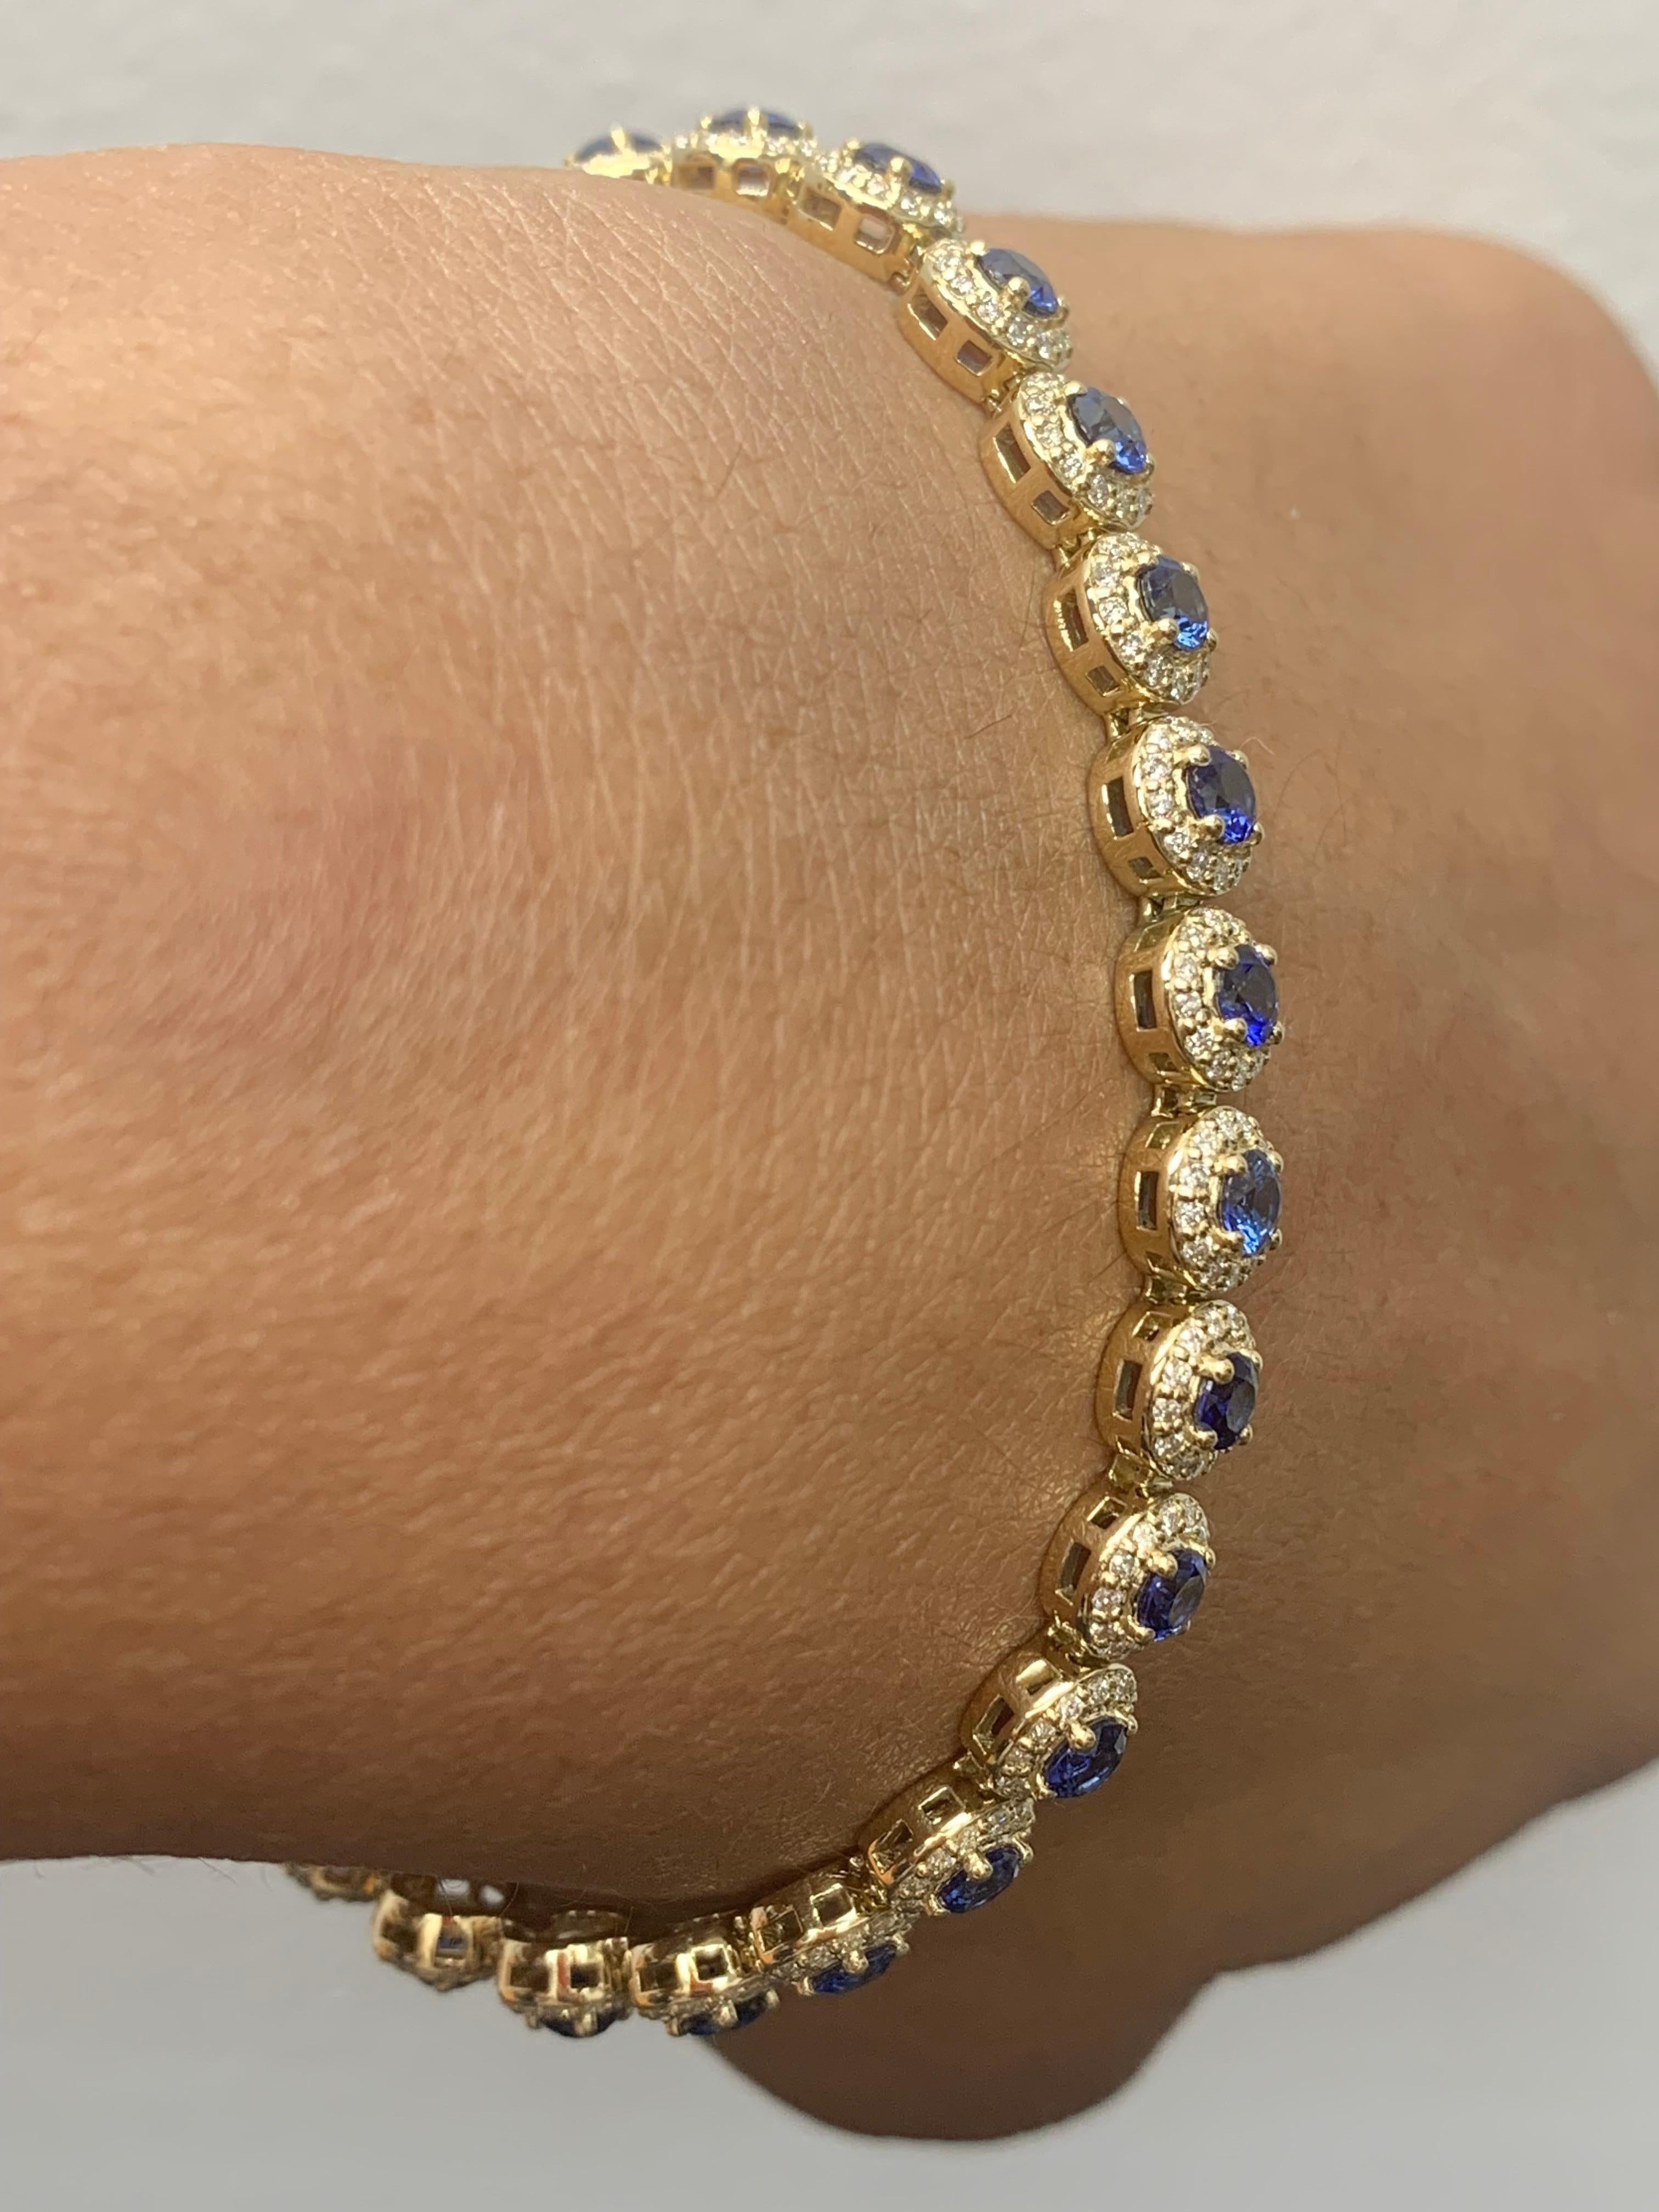 4.67 Carat Round Cut Sapphire and Diamond Tennis Bracelet in 14K Yellow Gold For Sale 1